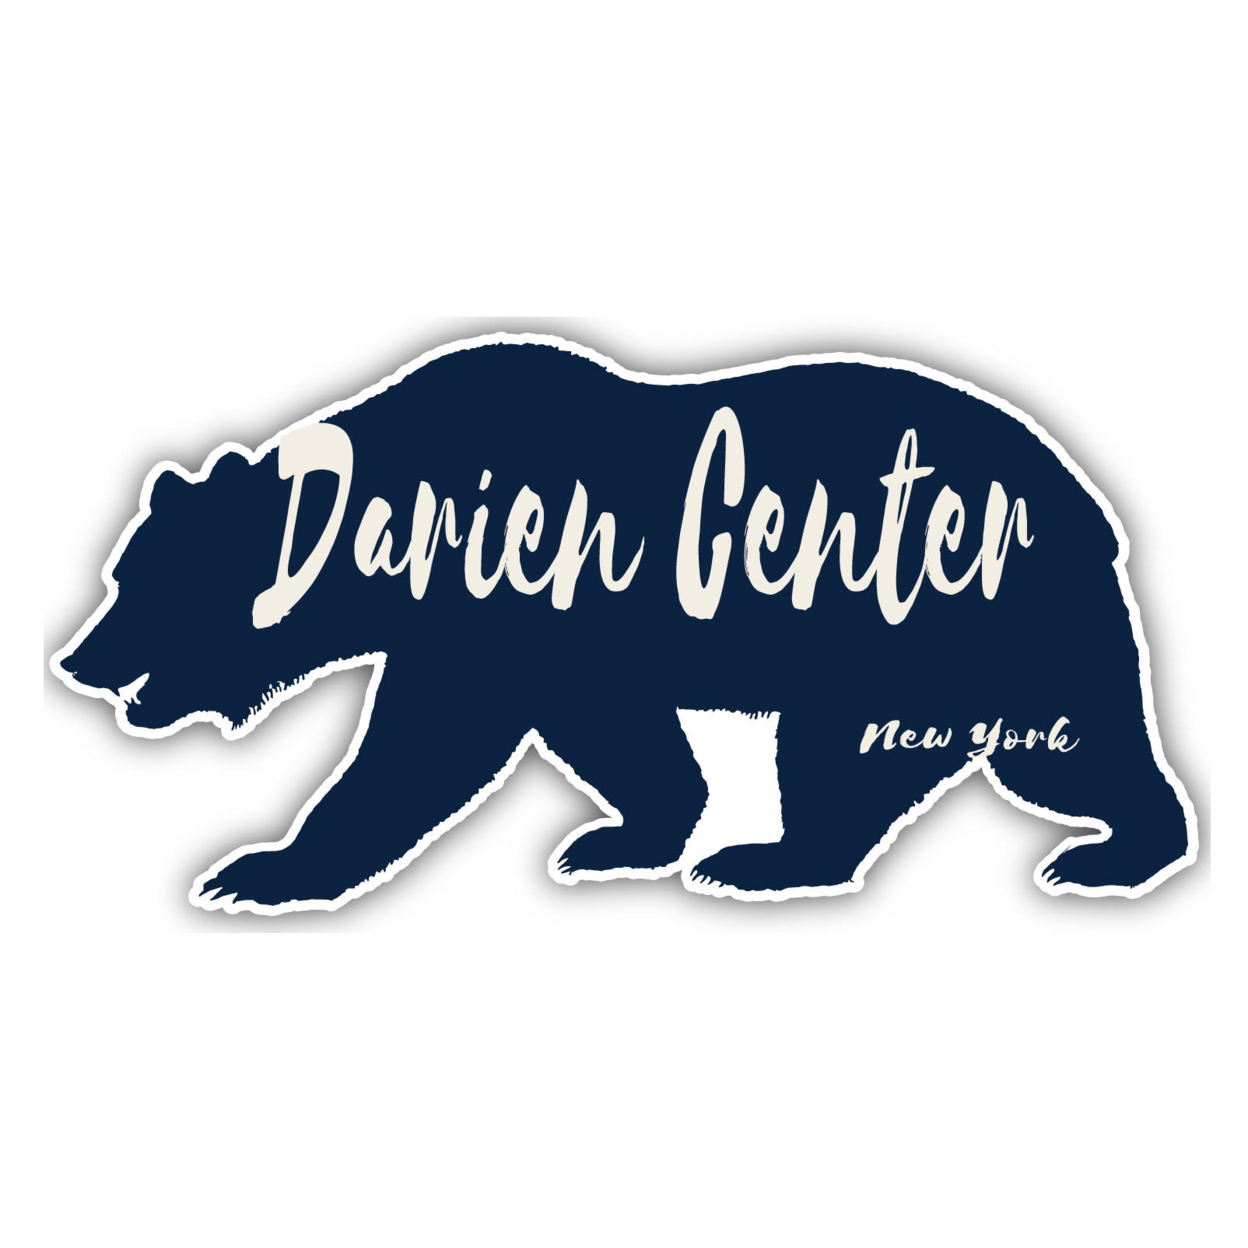 Darien Center New York Souvenir Decorative Stickers (Choose Theme And Size) - 4-Pack, 12-Inch, Tent